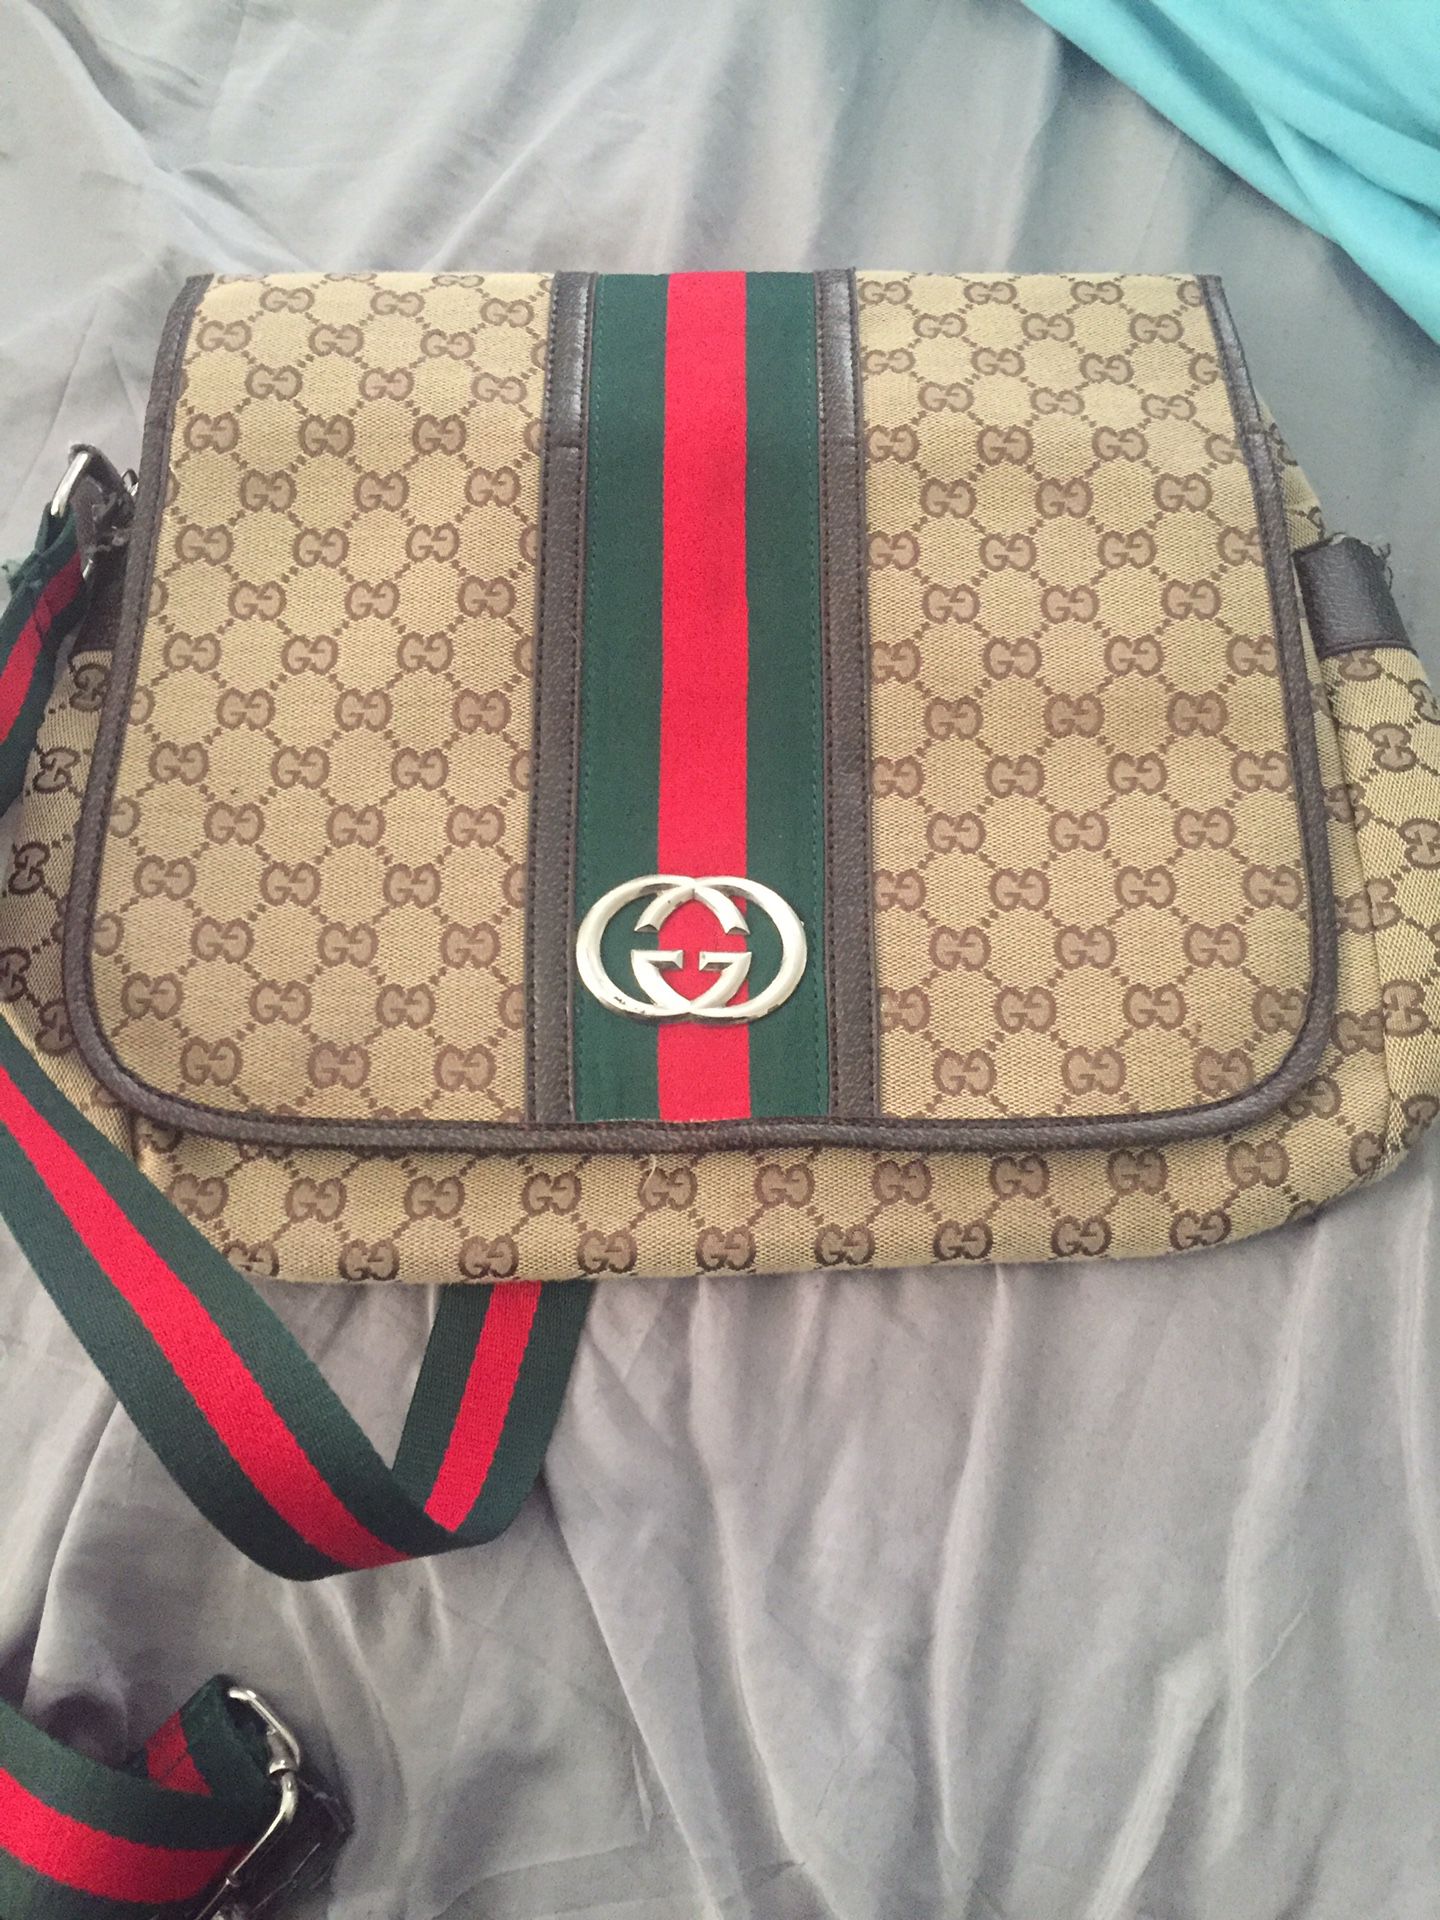 Gucci bag for sale!